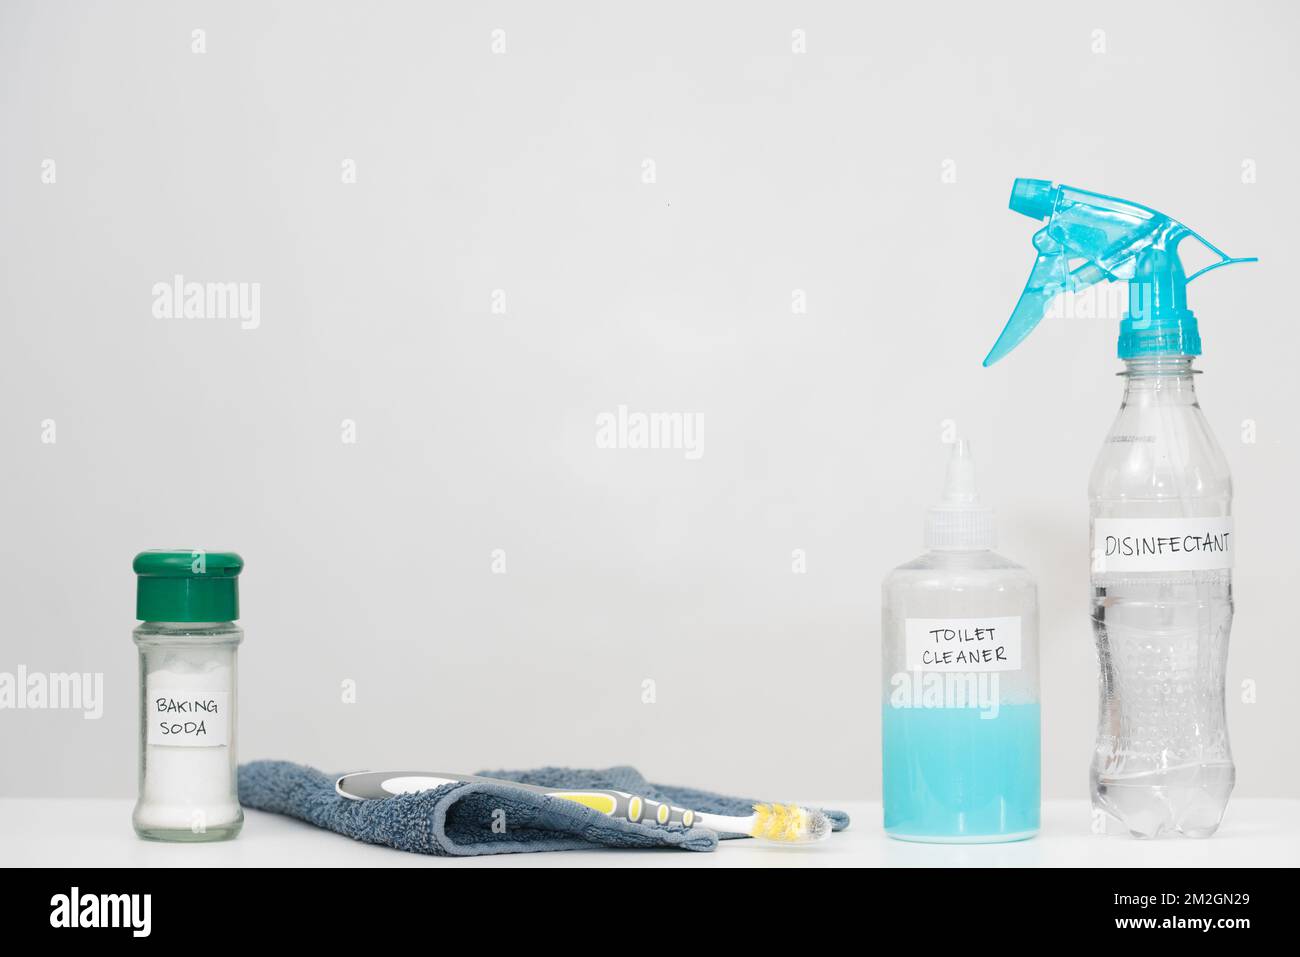 Home cleaning products with labels in reused plastic bottles. Recycled household materials on white background. Horizontal copy space. Reduce concept. Stock Photo